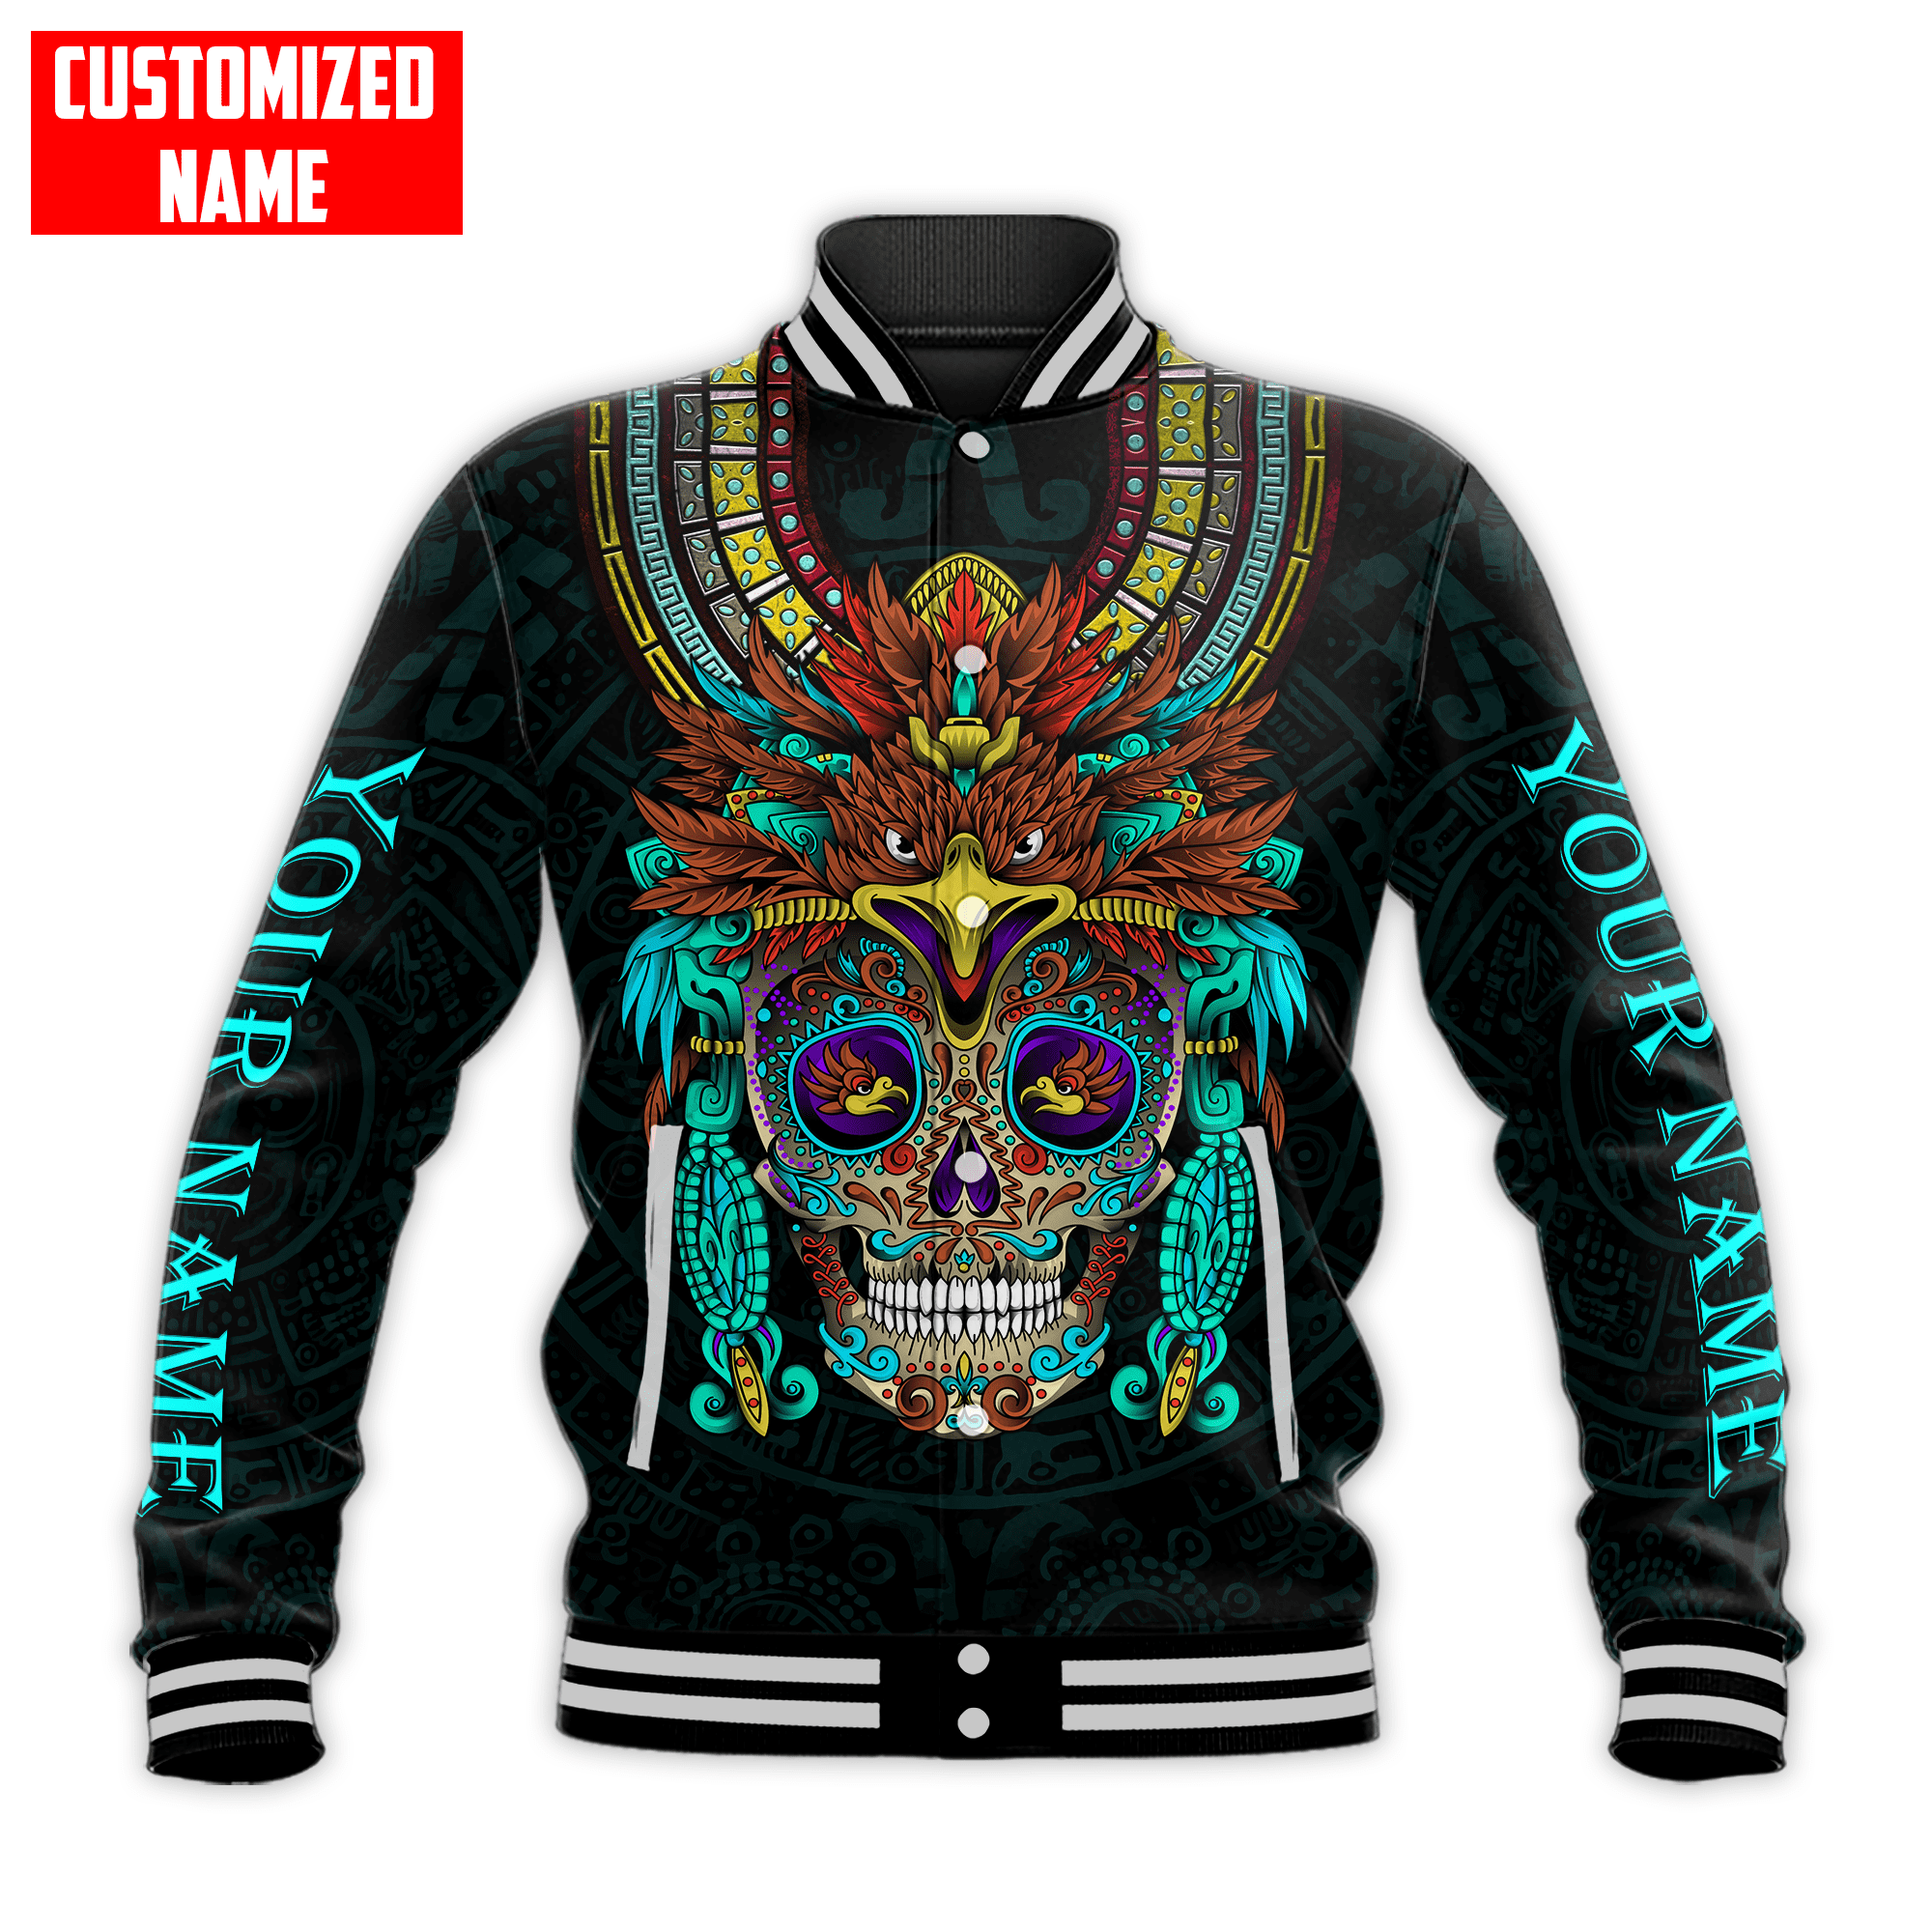  Themazicc Personalized Mexico Skull Eagle Green All Over Printed Baseball Jacket